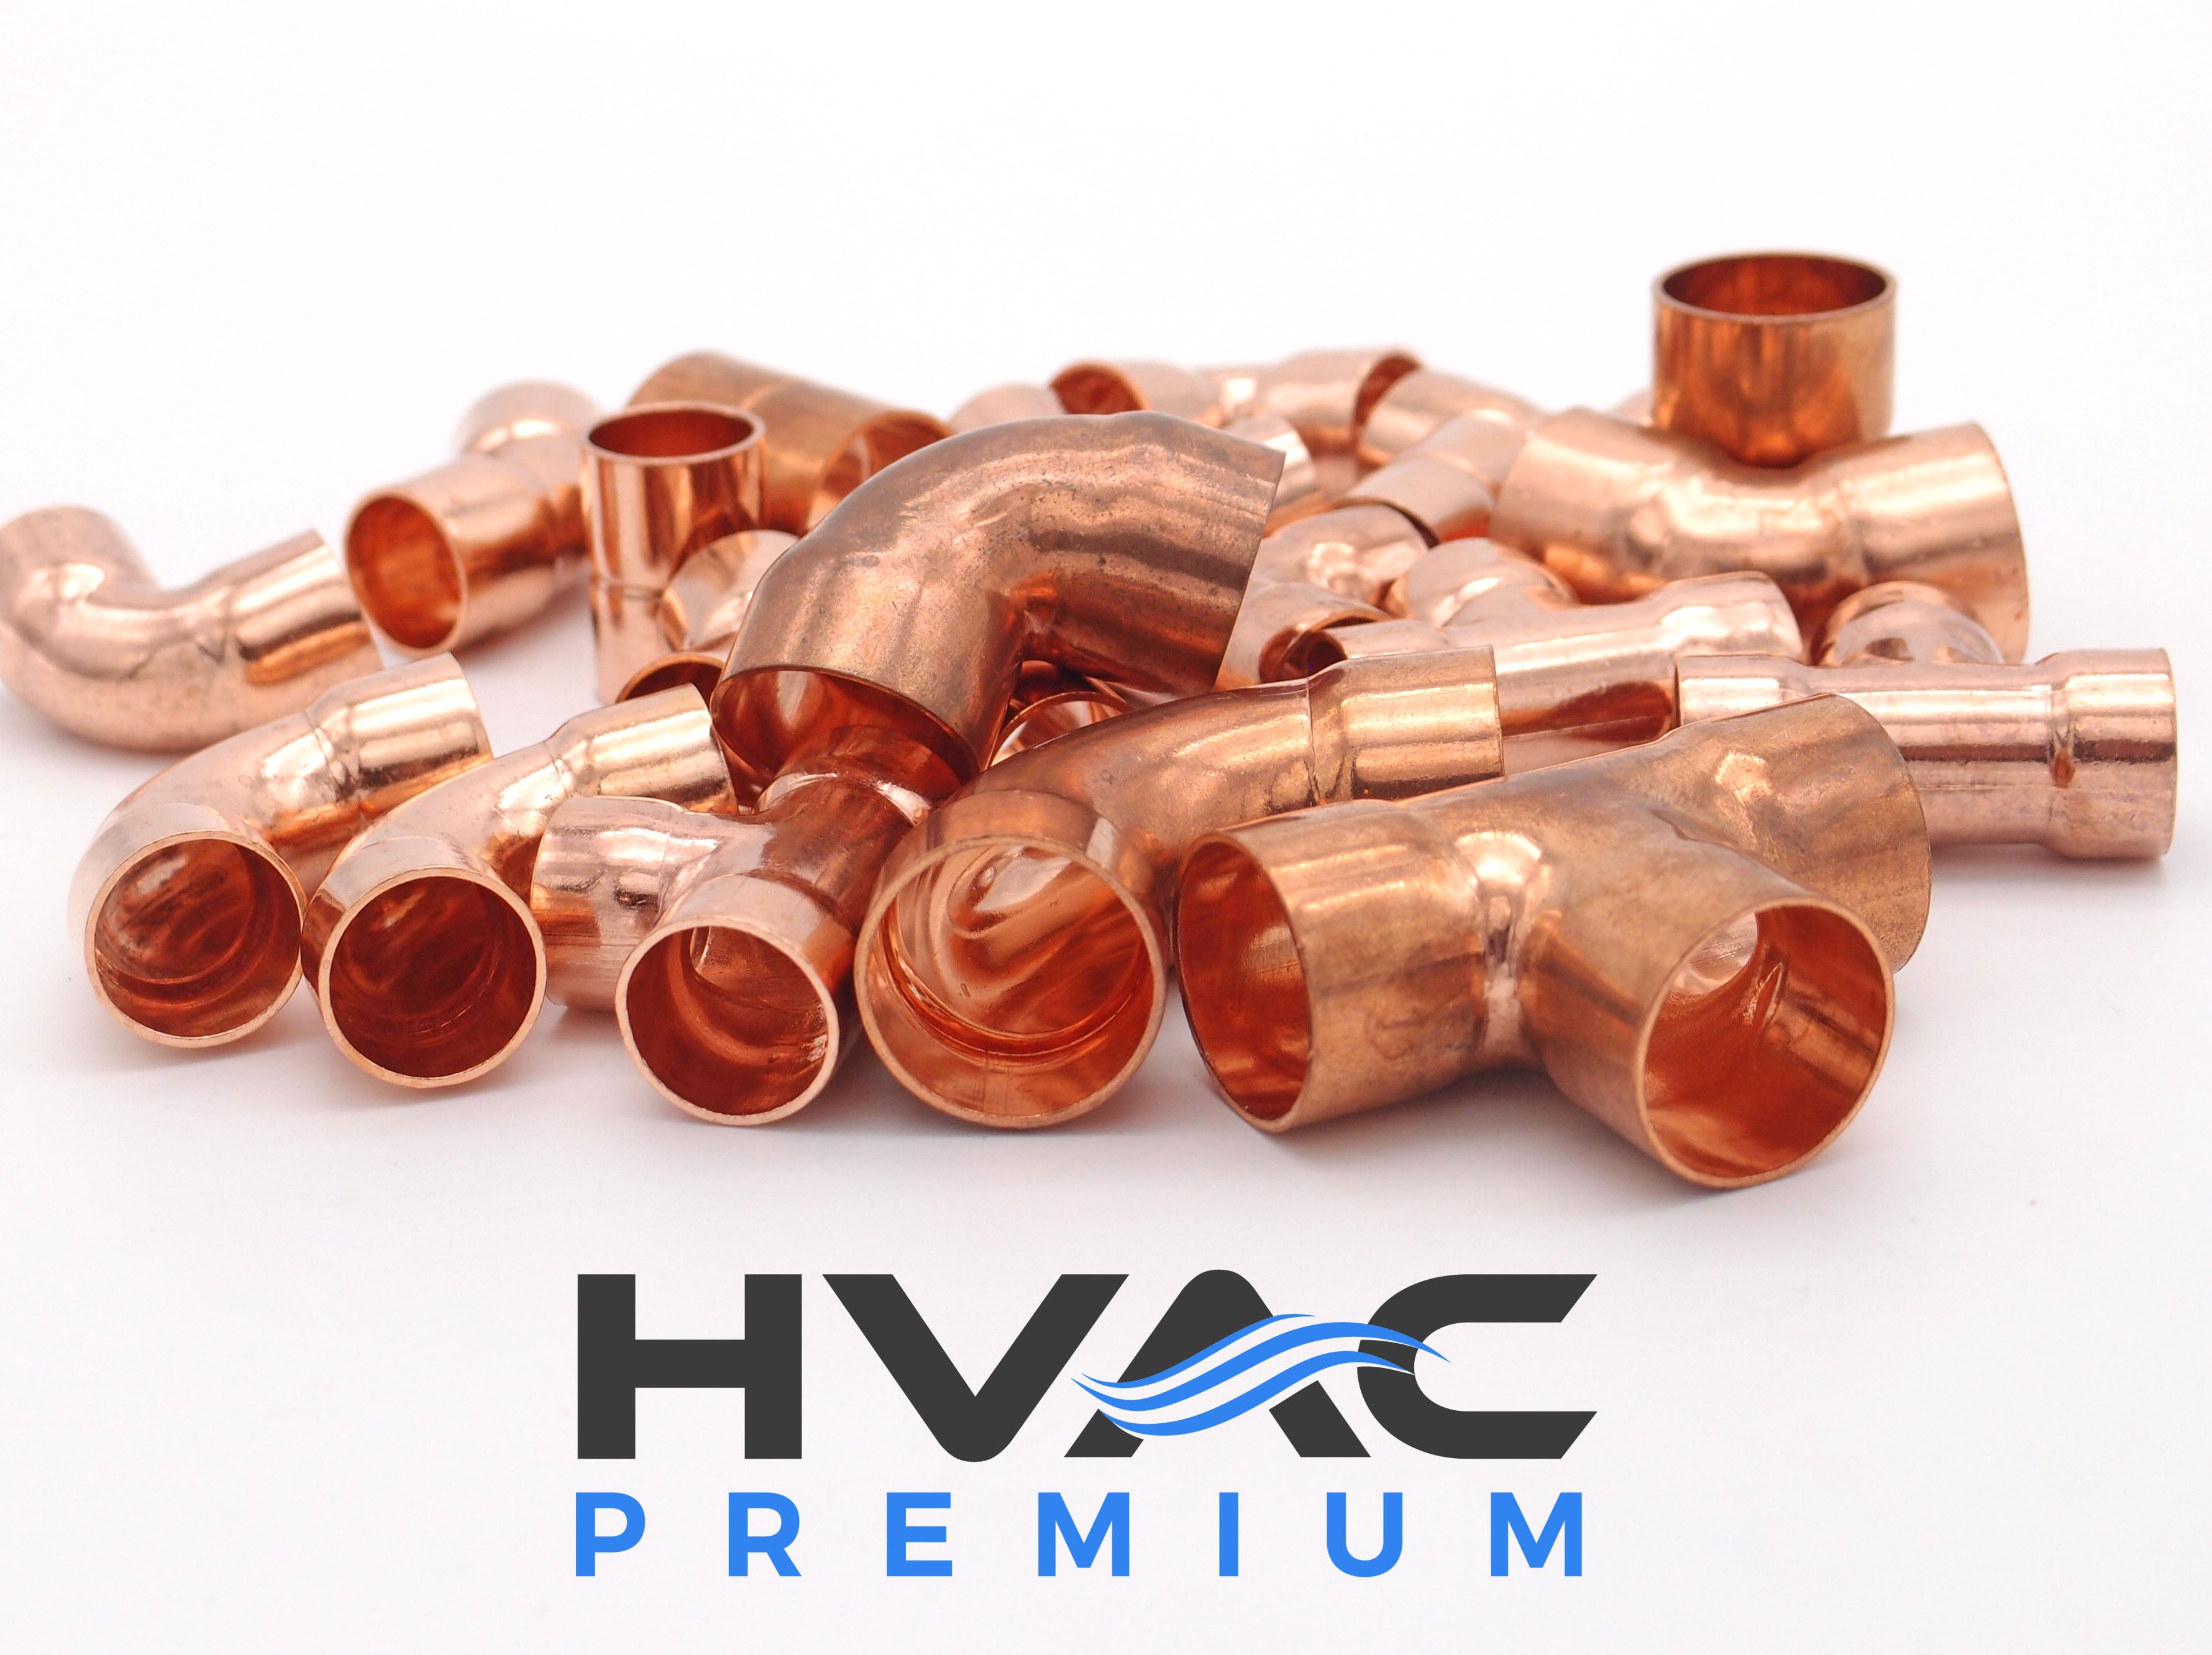 Copper Fitting 1 to 3/4 (HVAC Dimensions) Reducer / Increaser Copper Coupling & HVAC – 7/8 to 5/8 (Plumbing Inner Dimensions) 99.9% Pure Copper - 10 Pack